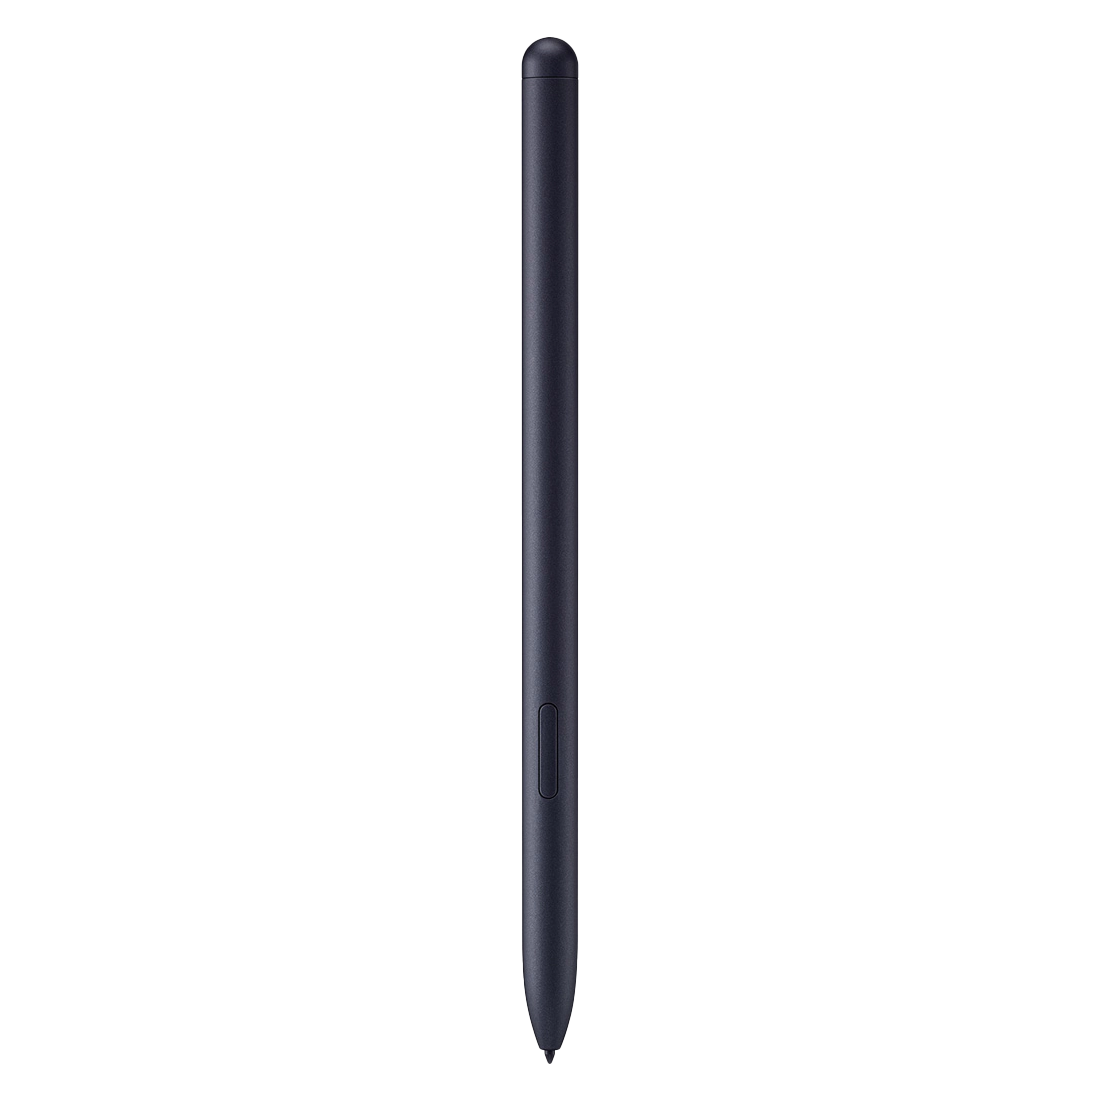 S Pen for Galaxy Tab S8 and Galaxy Book